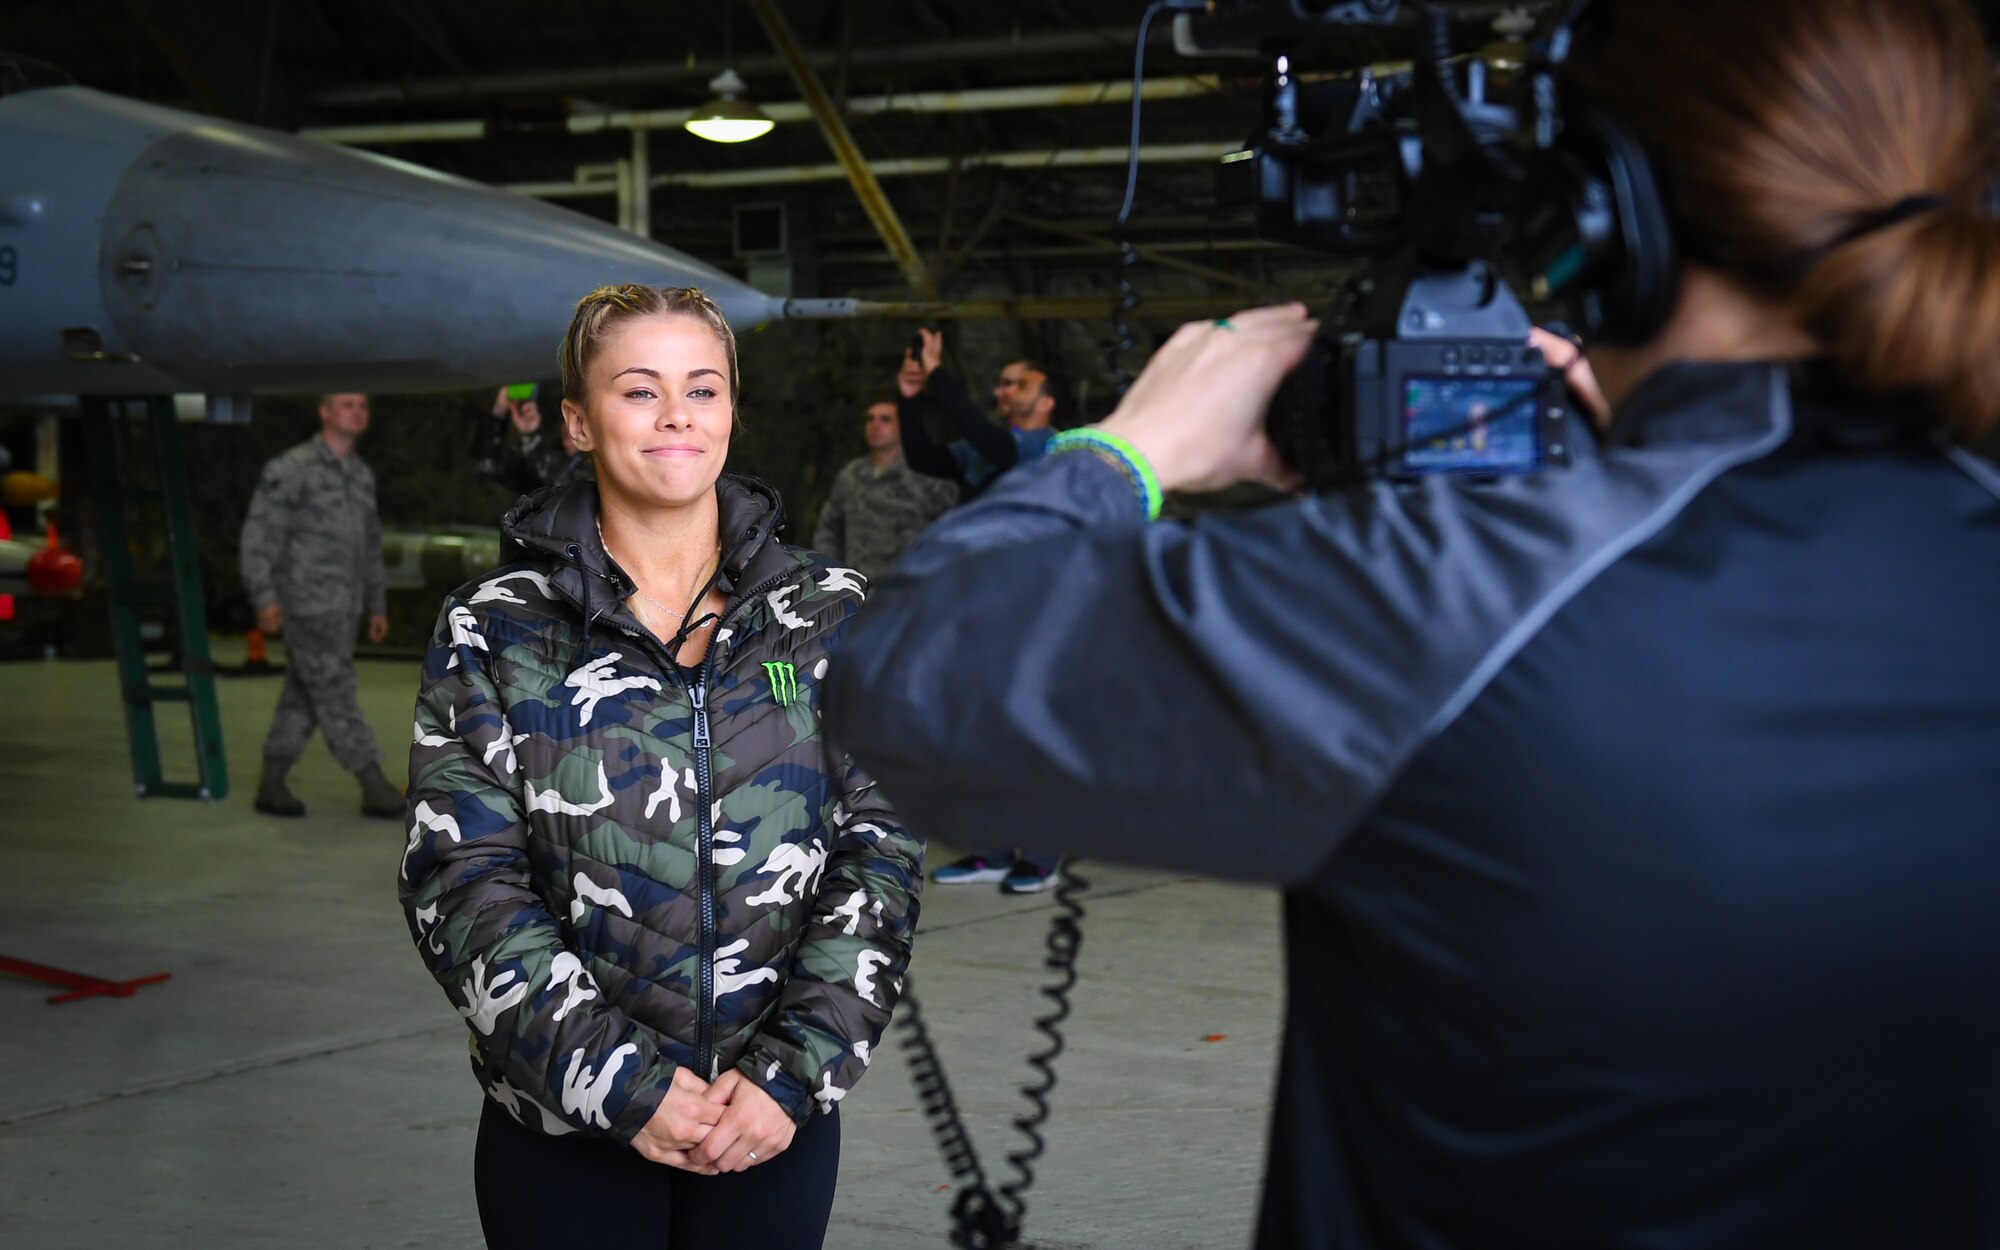 Ultimate Fighting Championship fighter Paige VanZant answers questions from a USO videographer during a tour at Osan Air Base, April 23, 2018.